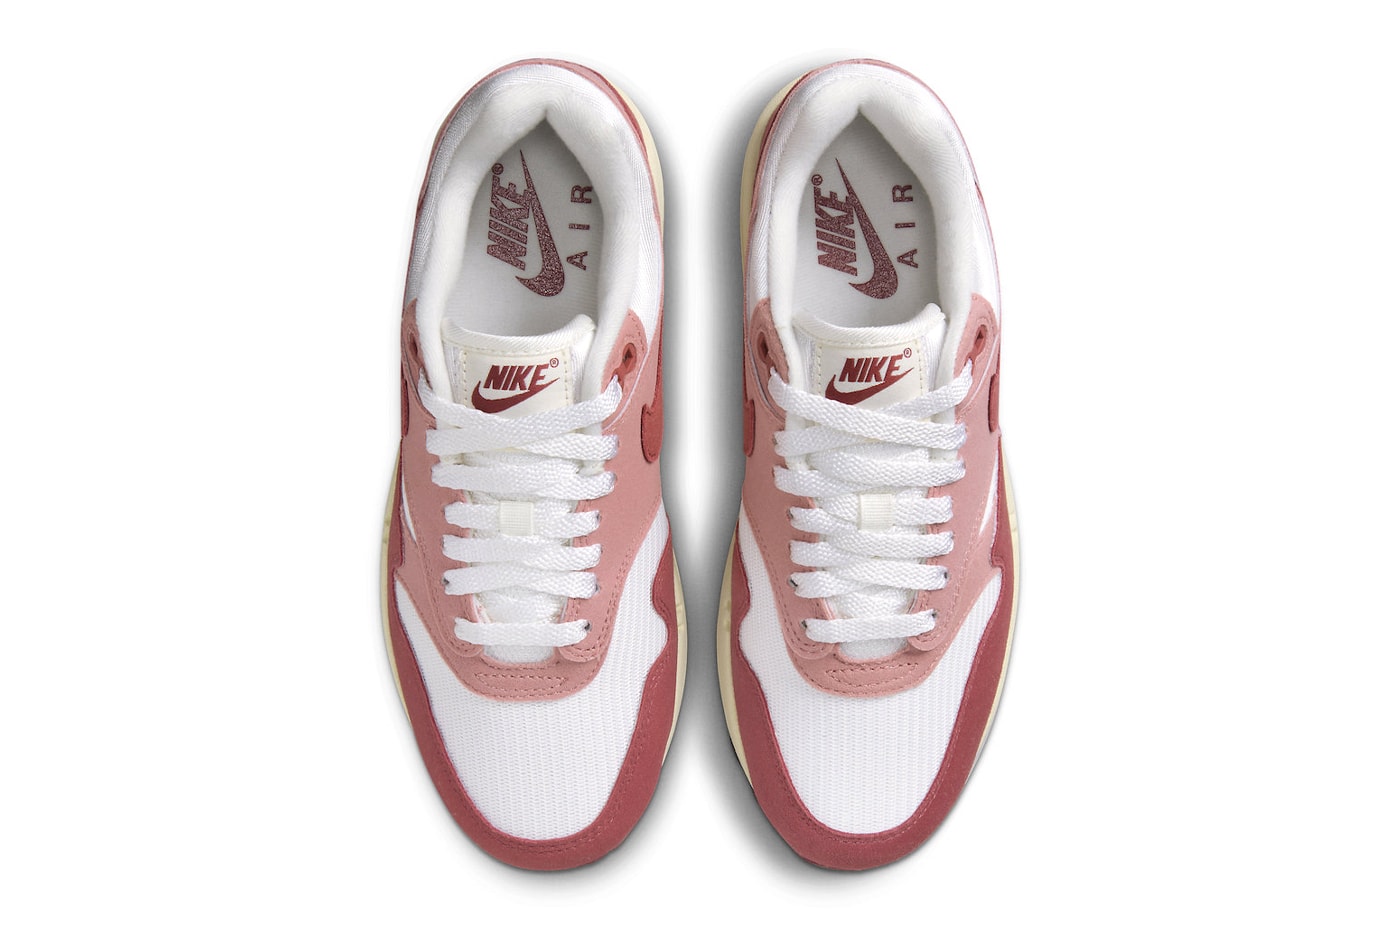 Official Look at Nike Air Max 1 "Red Stardust" Sail/Cedar-Red Stardust-Coconut Milk swoosh DZ2628-103 fall november release